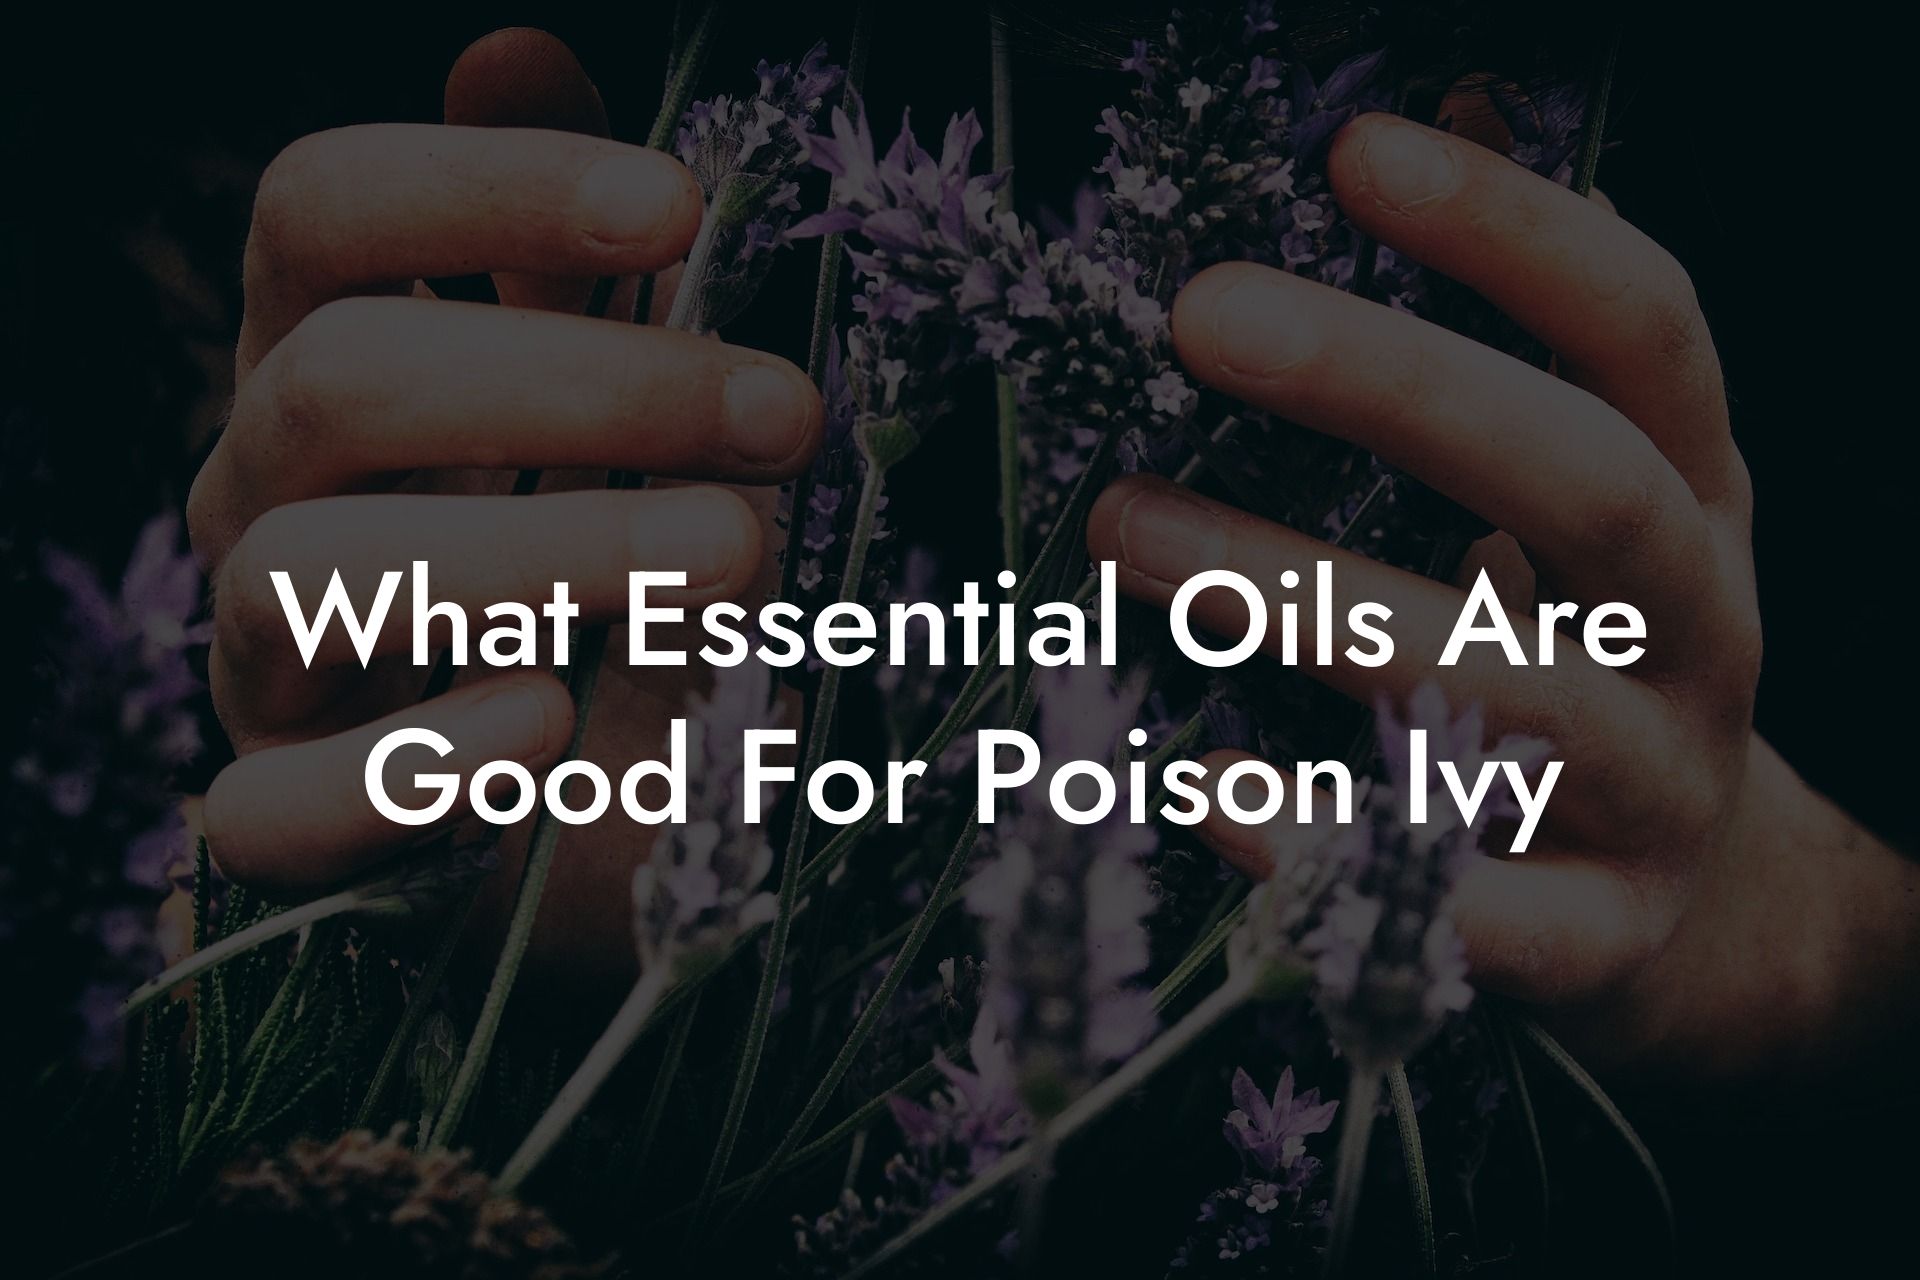 What Essential Oils Are Good For Poison Ivy